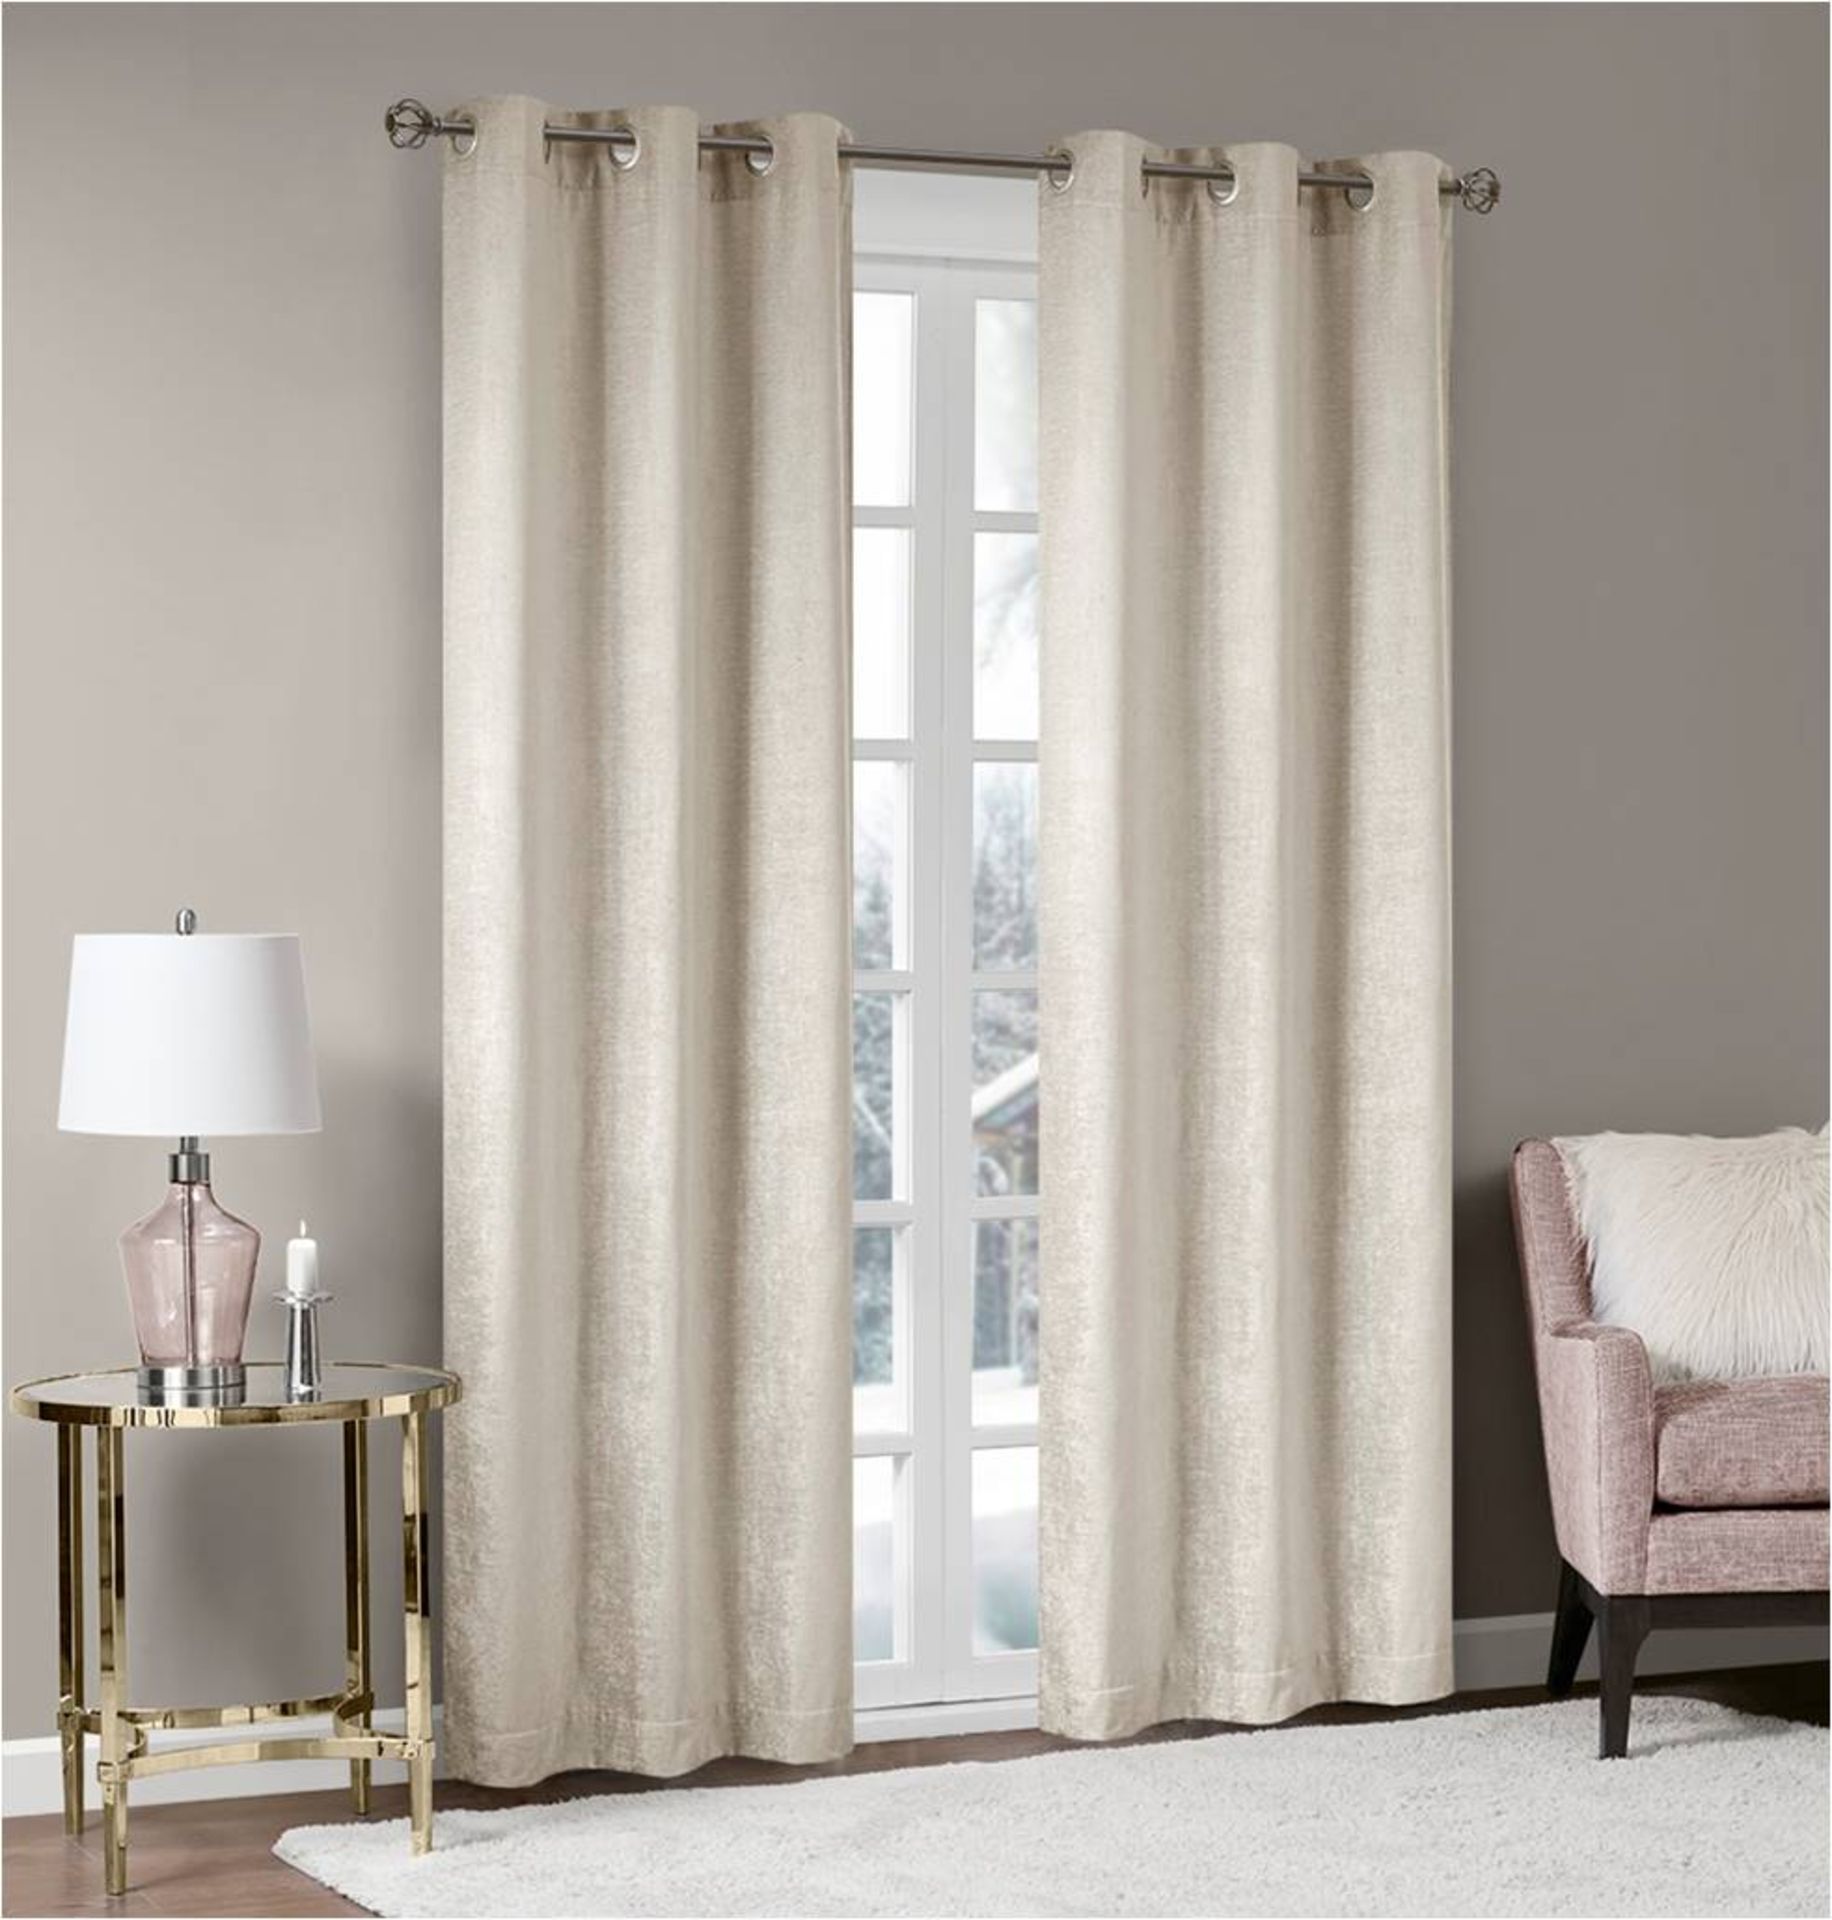 1 x Set of Madison Park Palazzo Chenille Ivory Curtains 66x72" - Product Code MP40-0301UK (Brand New